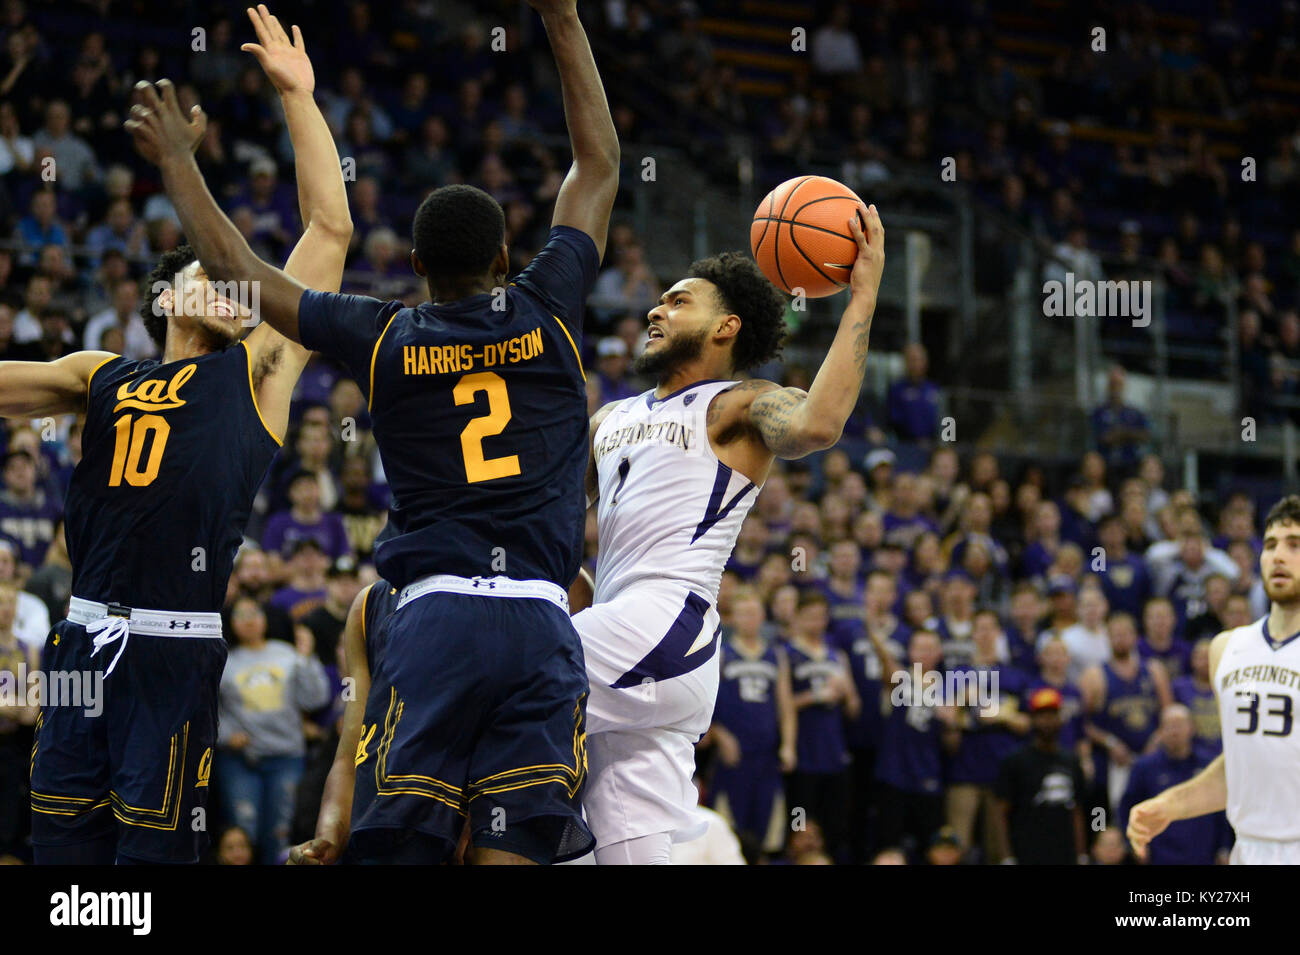 Seattle, WA, USA. 11th Jan, 2018. UW point guard David Crisp (1) drives down the lane against Cal defenders Juhwan Harris-Dyson (2) and Justice Sueing (10) during a PAC12 basketball game between the Washington Huskies and Cal Bears. The game was played at Hec Ed Pavilion in Seattle, WA. Jeff Halstead/CSM/Alamy Live News Stock Photo